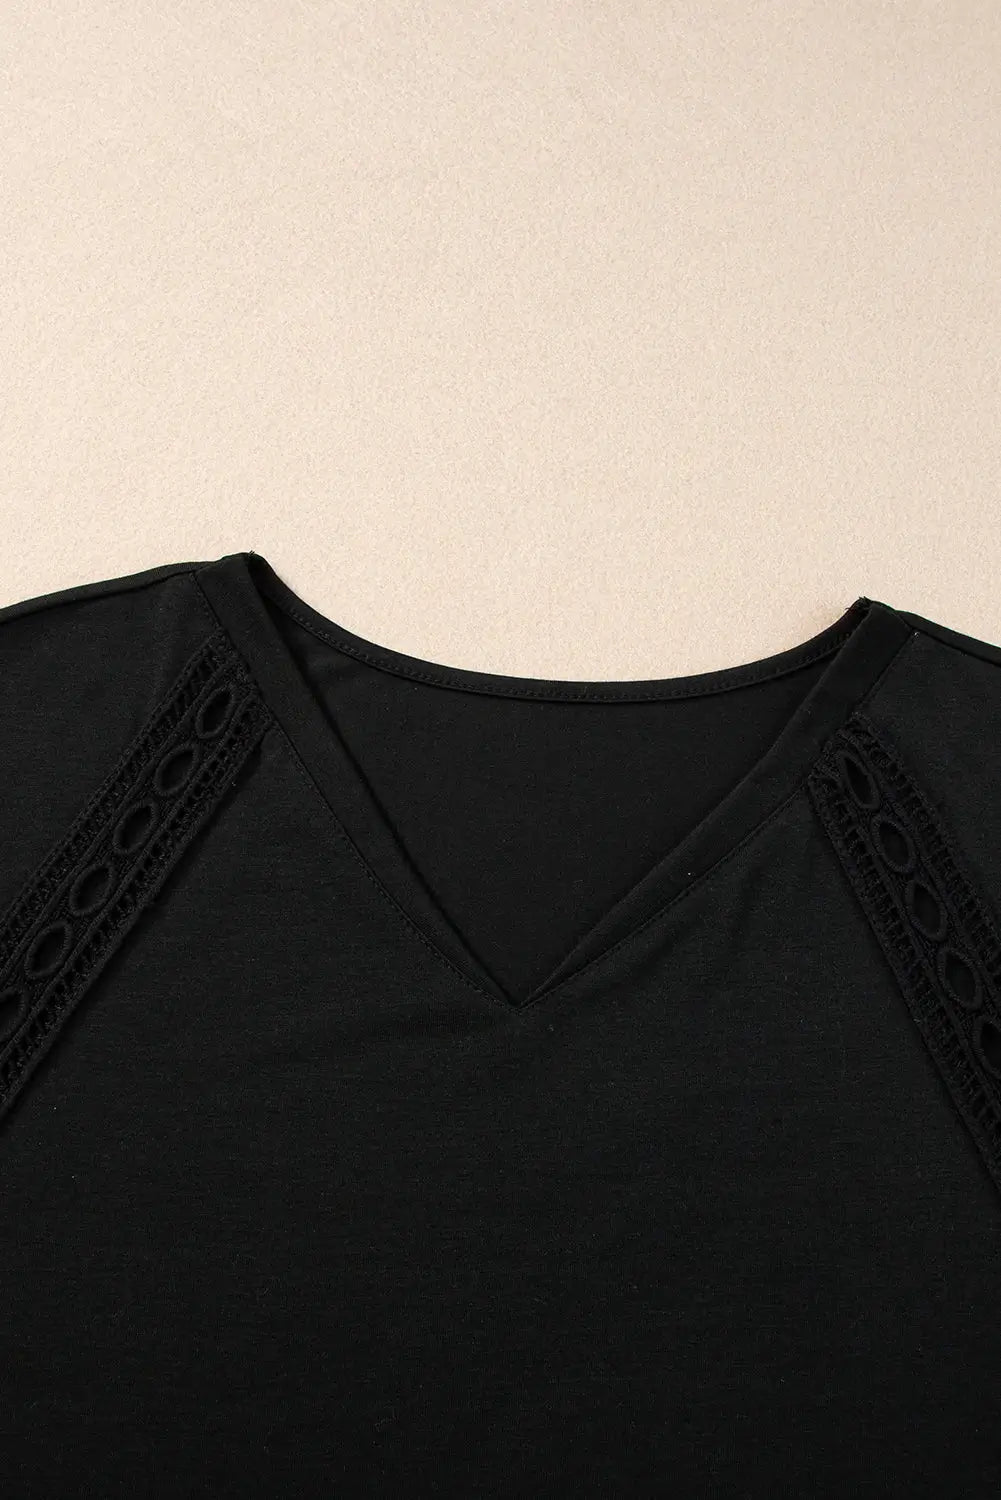 Crochet lace detail oversized tee - tops & tees